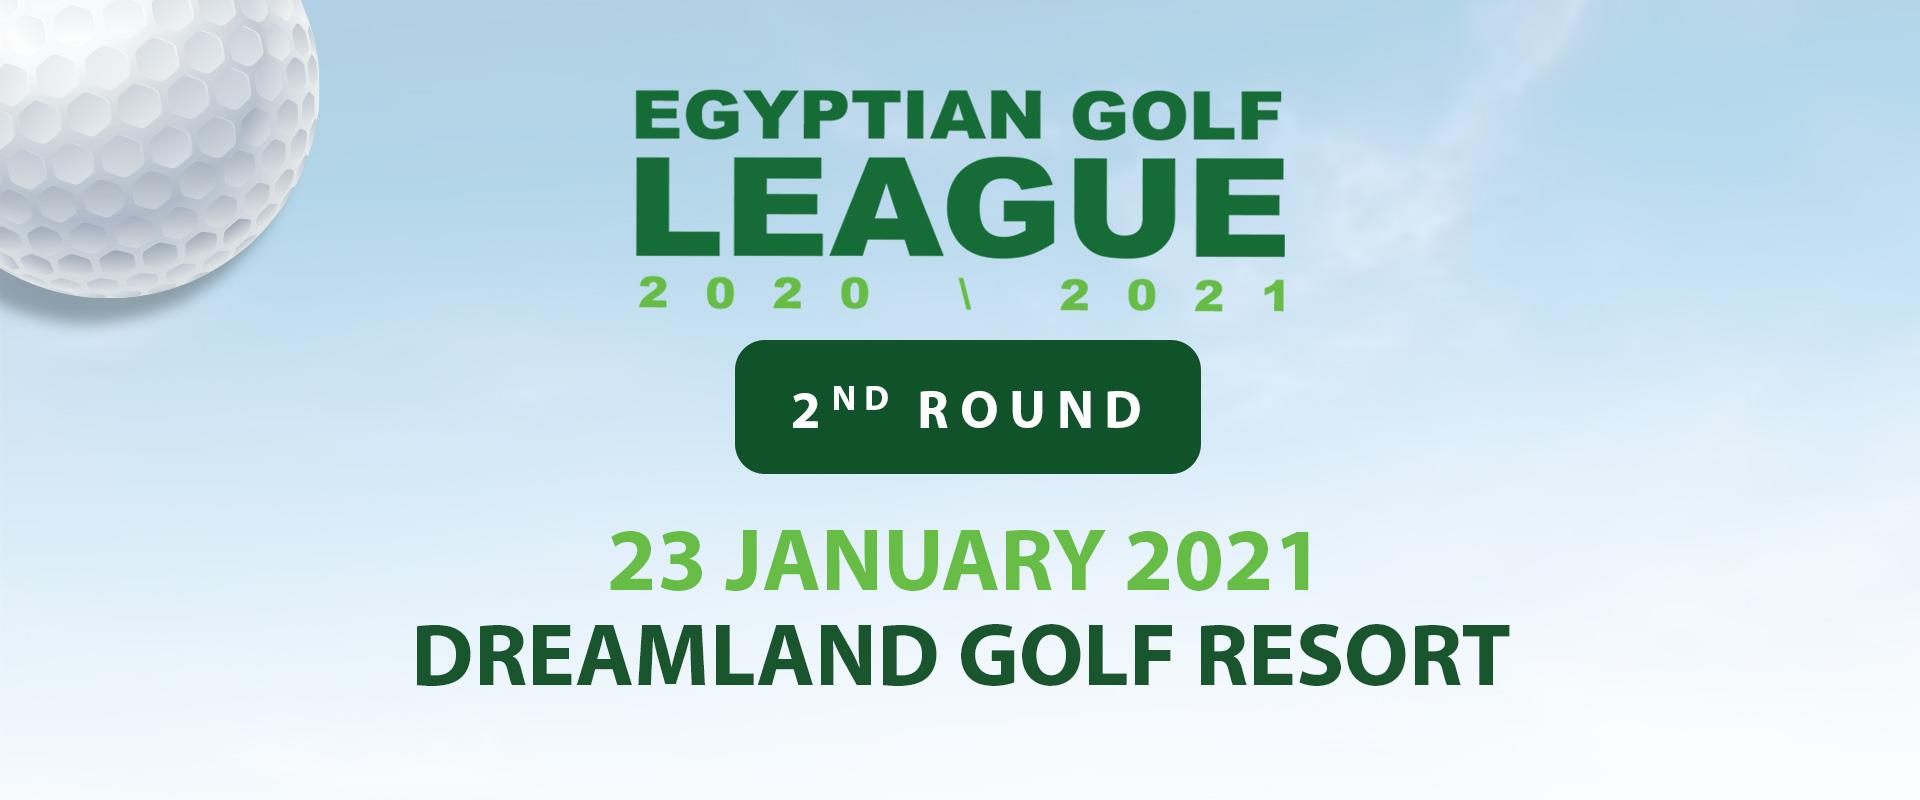 Dreamland Golf Club hosts the second round of the Egyptian Golf League